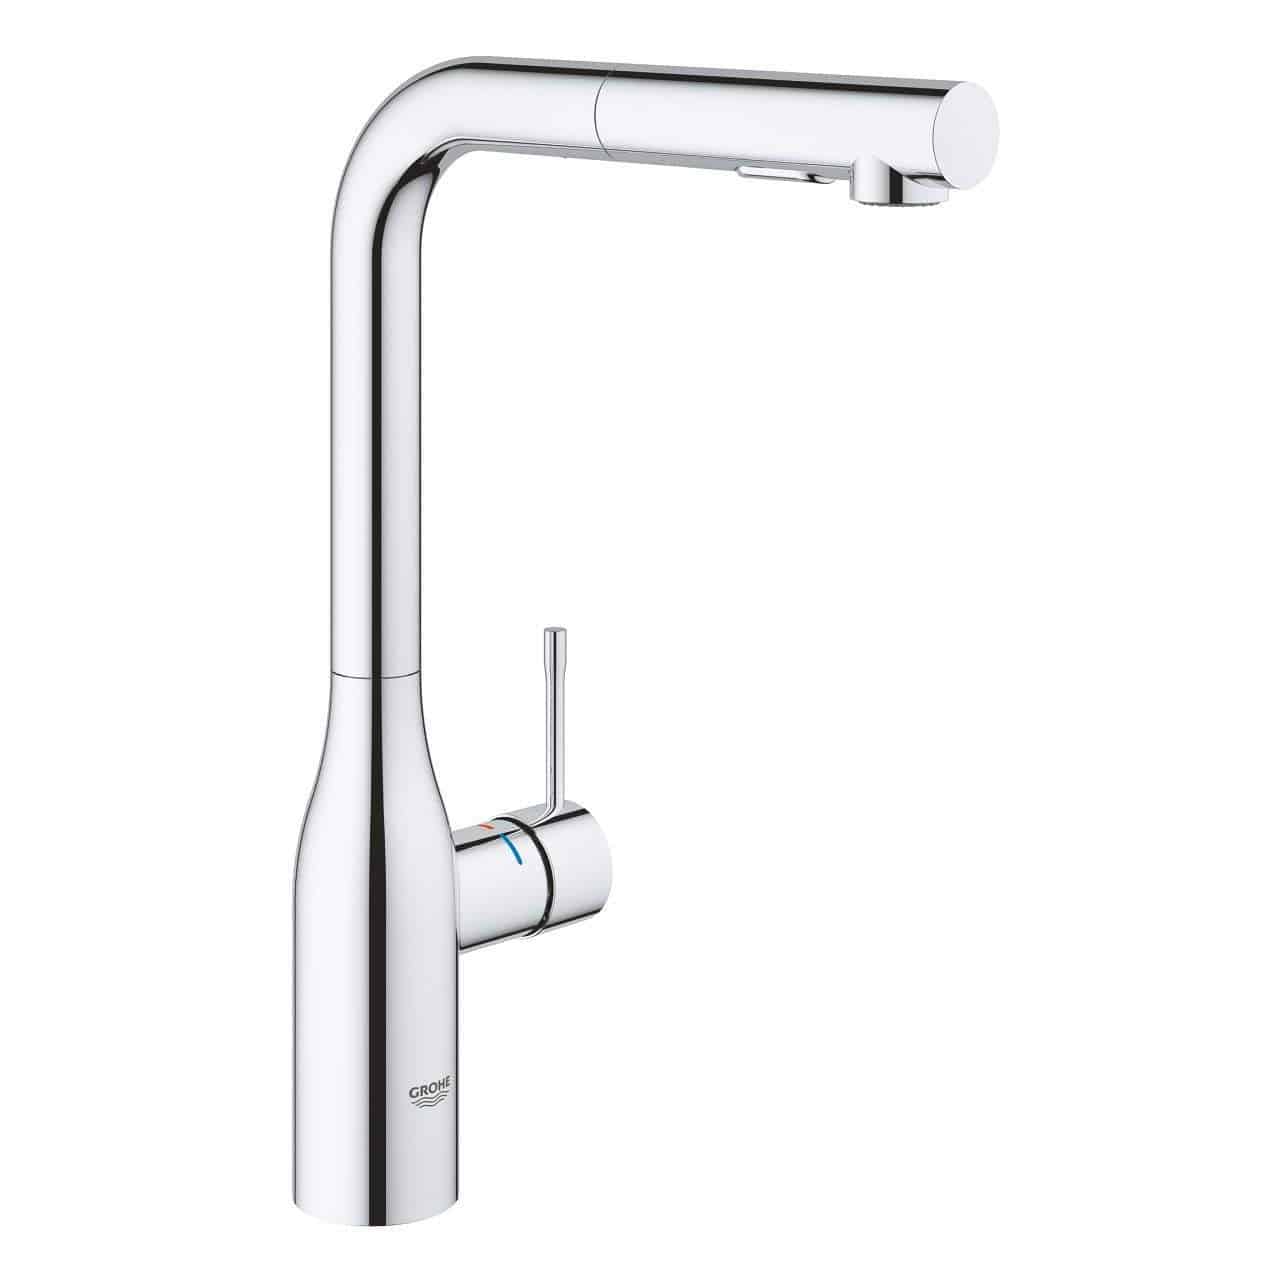 Essence 廚房單把手龍頭 Kitchen Single-Lever Sink Mixer-Grohe-30270000-Home Manner